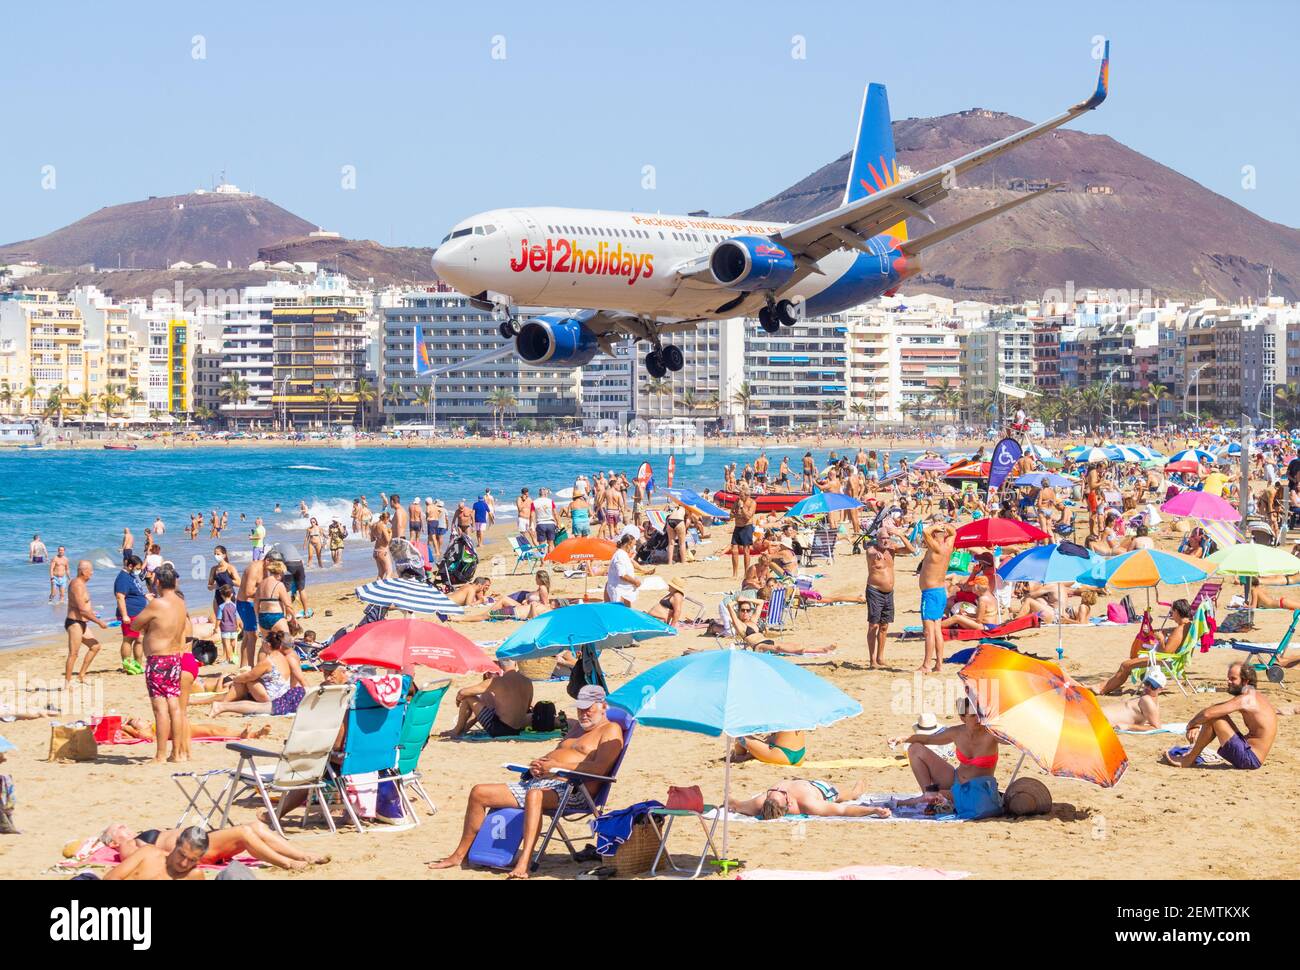 Composite image of Jet2.com aircraft flying over las canteras beach in Las Palmas on Gran Canaria, Canary Islands, Spain. Stock Photo